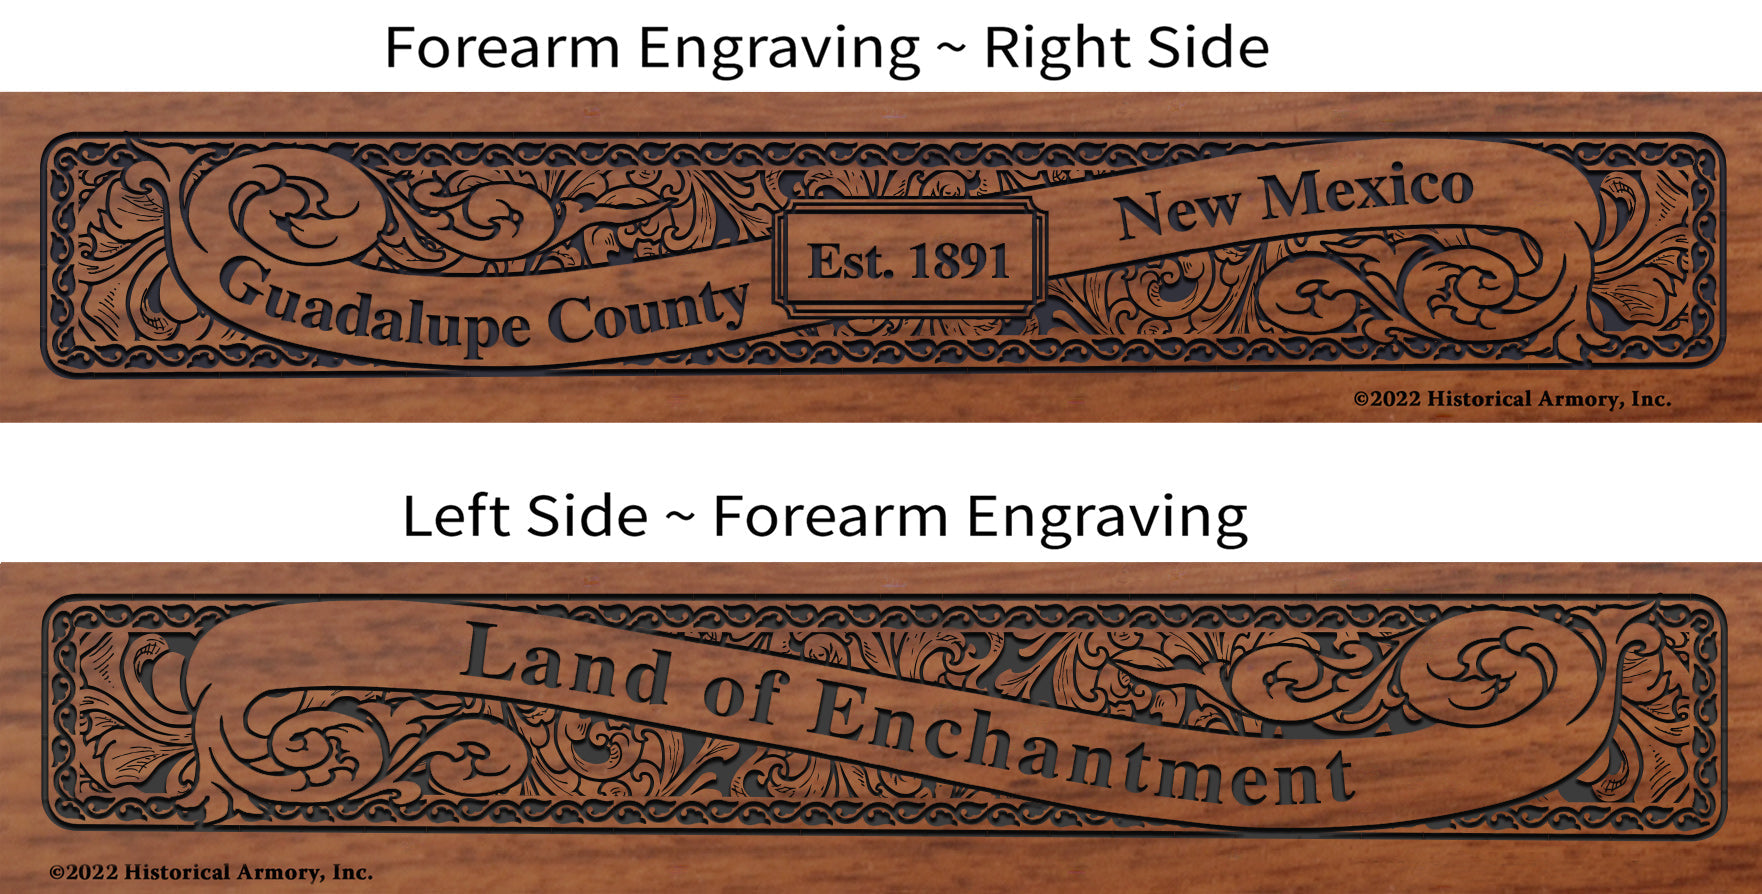 Guadalupe County New Mexico Engraved Rifle Forearm